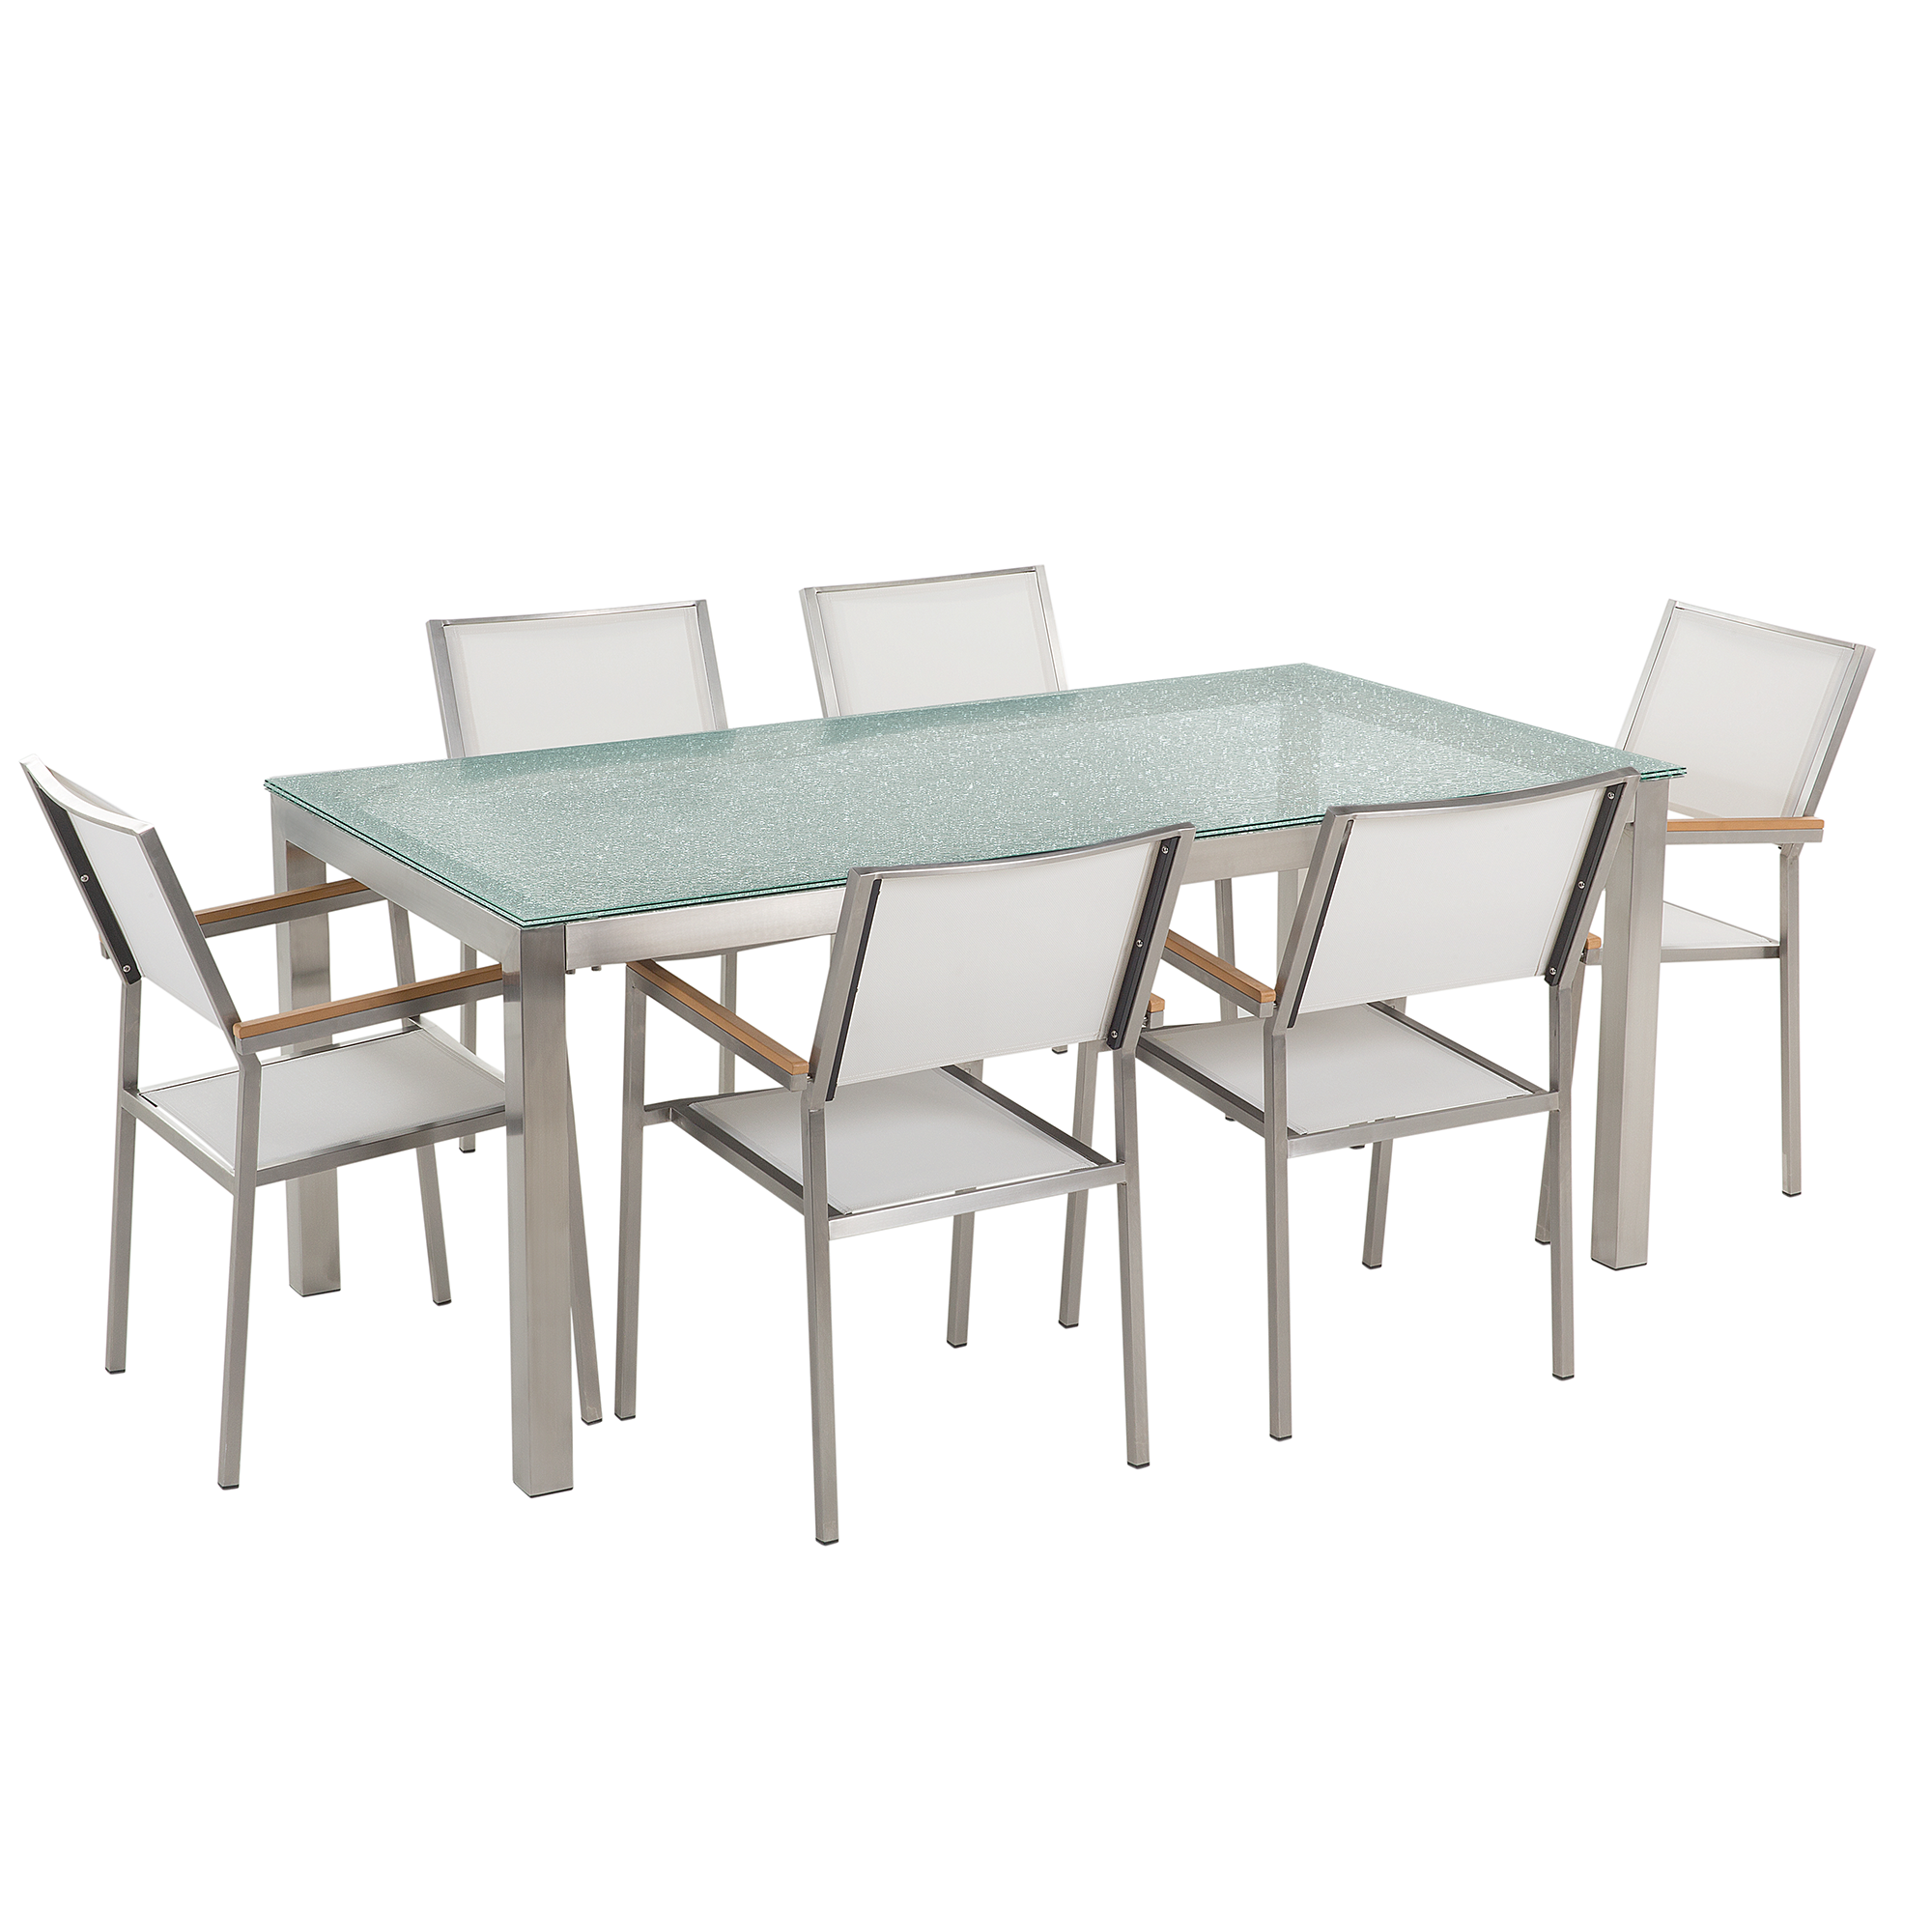 Beliani Garden Dining Set White with Cracked Glass Table Top 6 Seats 180 x 90 cm